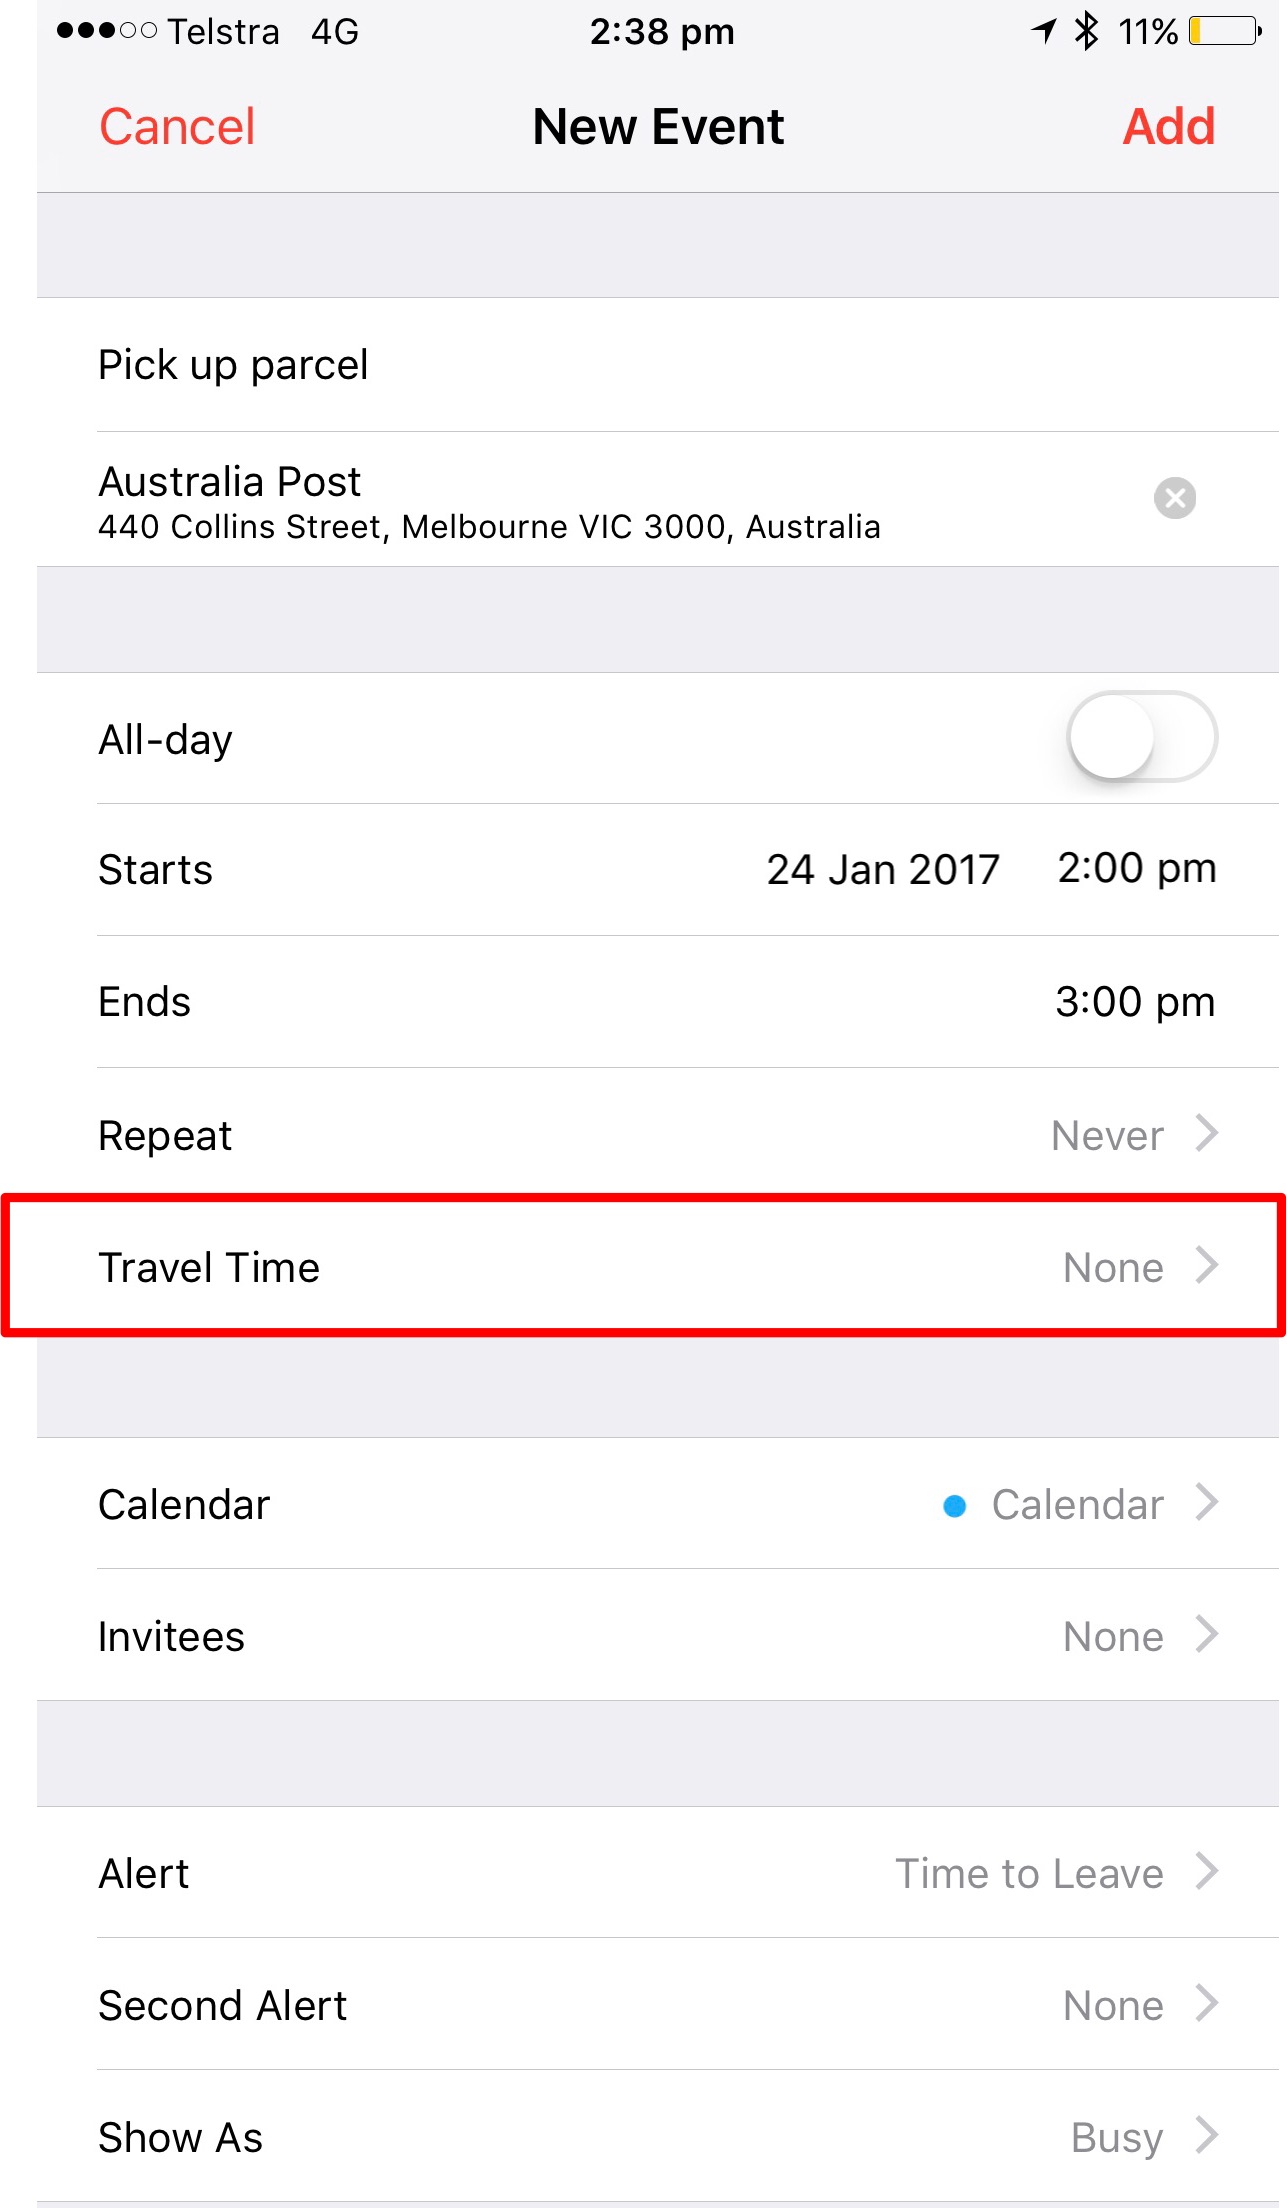 Select Travel Time option in Calendar